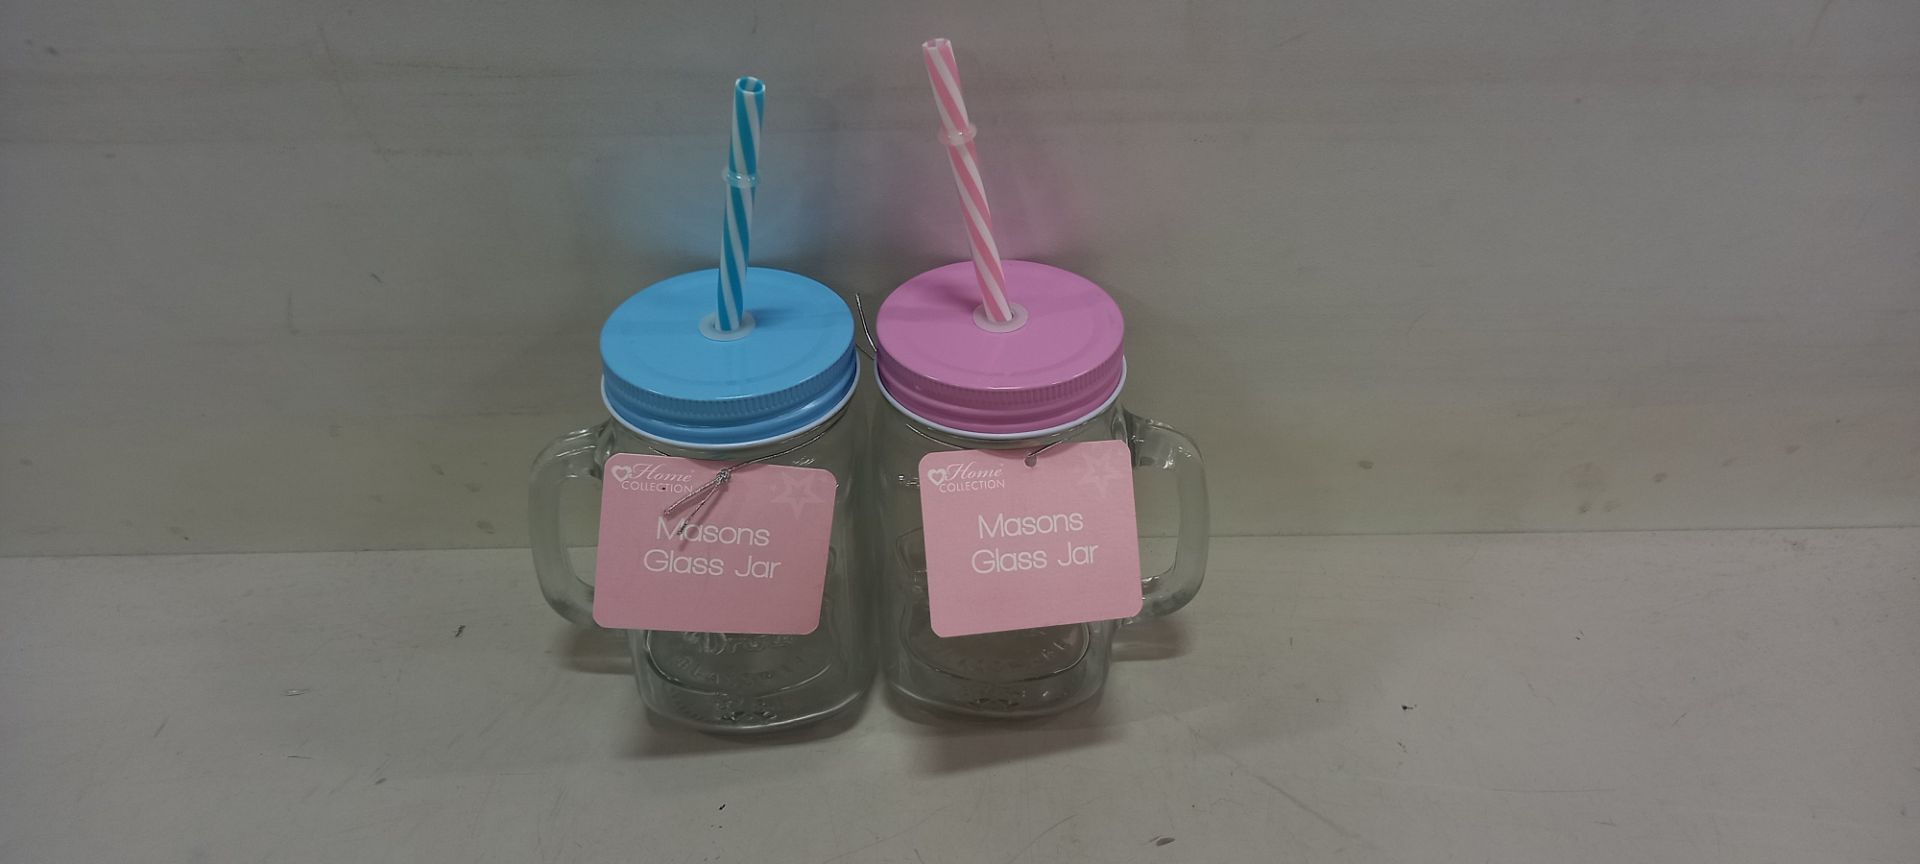 108 X BRAND NEW MASON GLASS JARS WITH STRAWS ( IN BLUE AND PINK ( PLASTIC STRAWS ) IN 9 BOXES